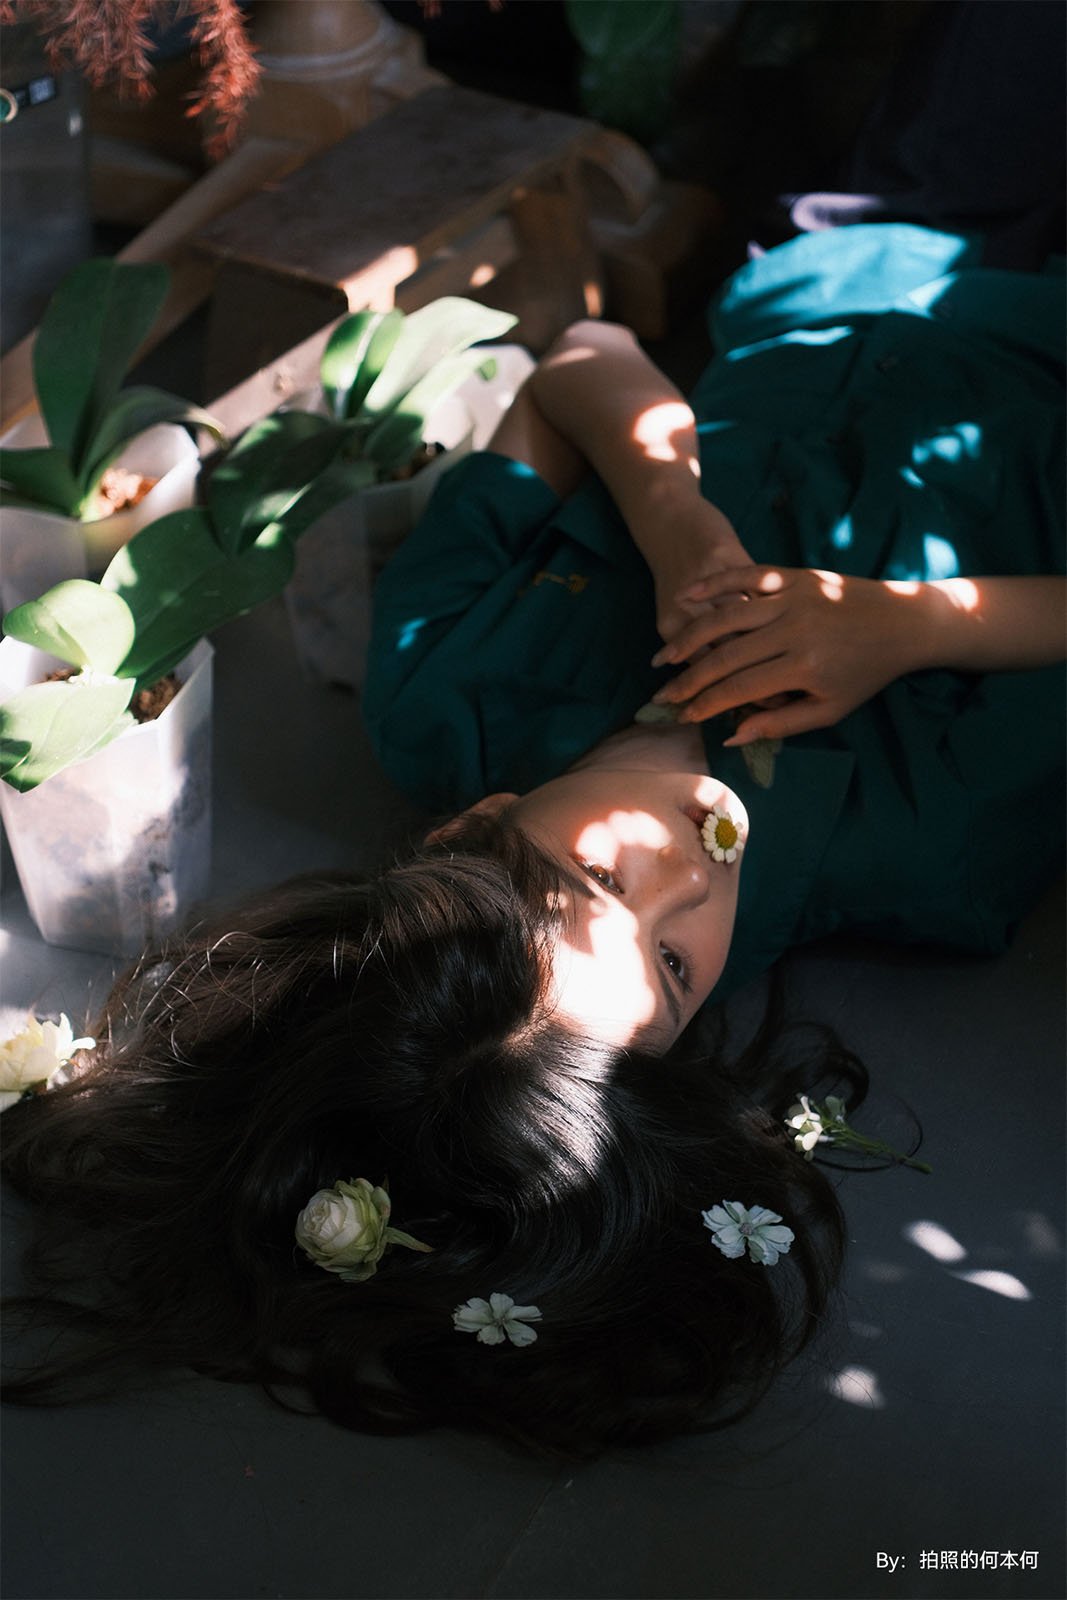 A woman lying on the floor with white flowers in her dark hair, sunlight casting shadows around her, dressed in a teal dress. tranquil and artistic atmosphere.